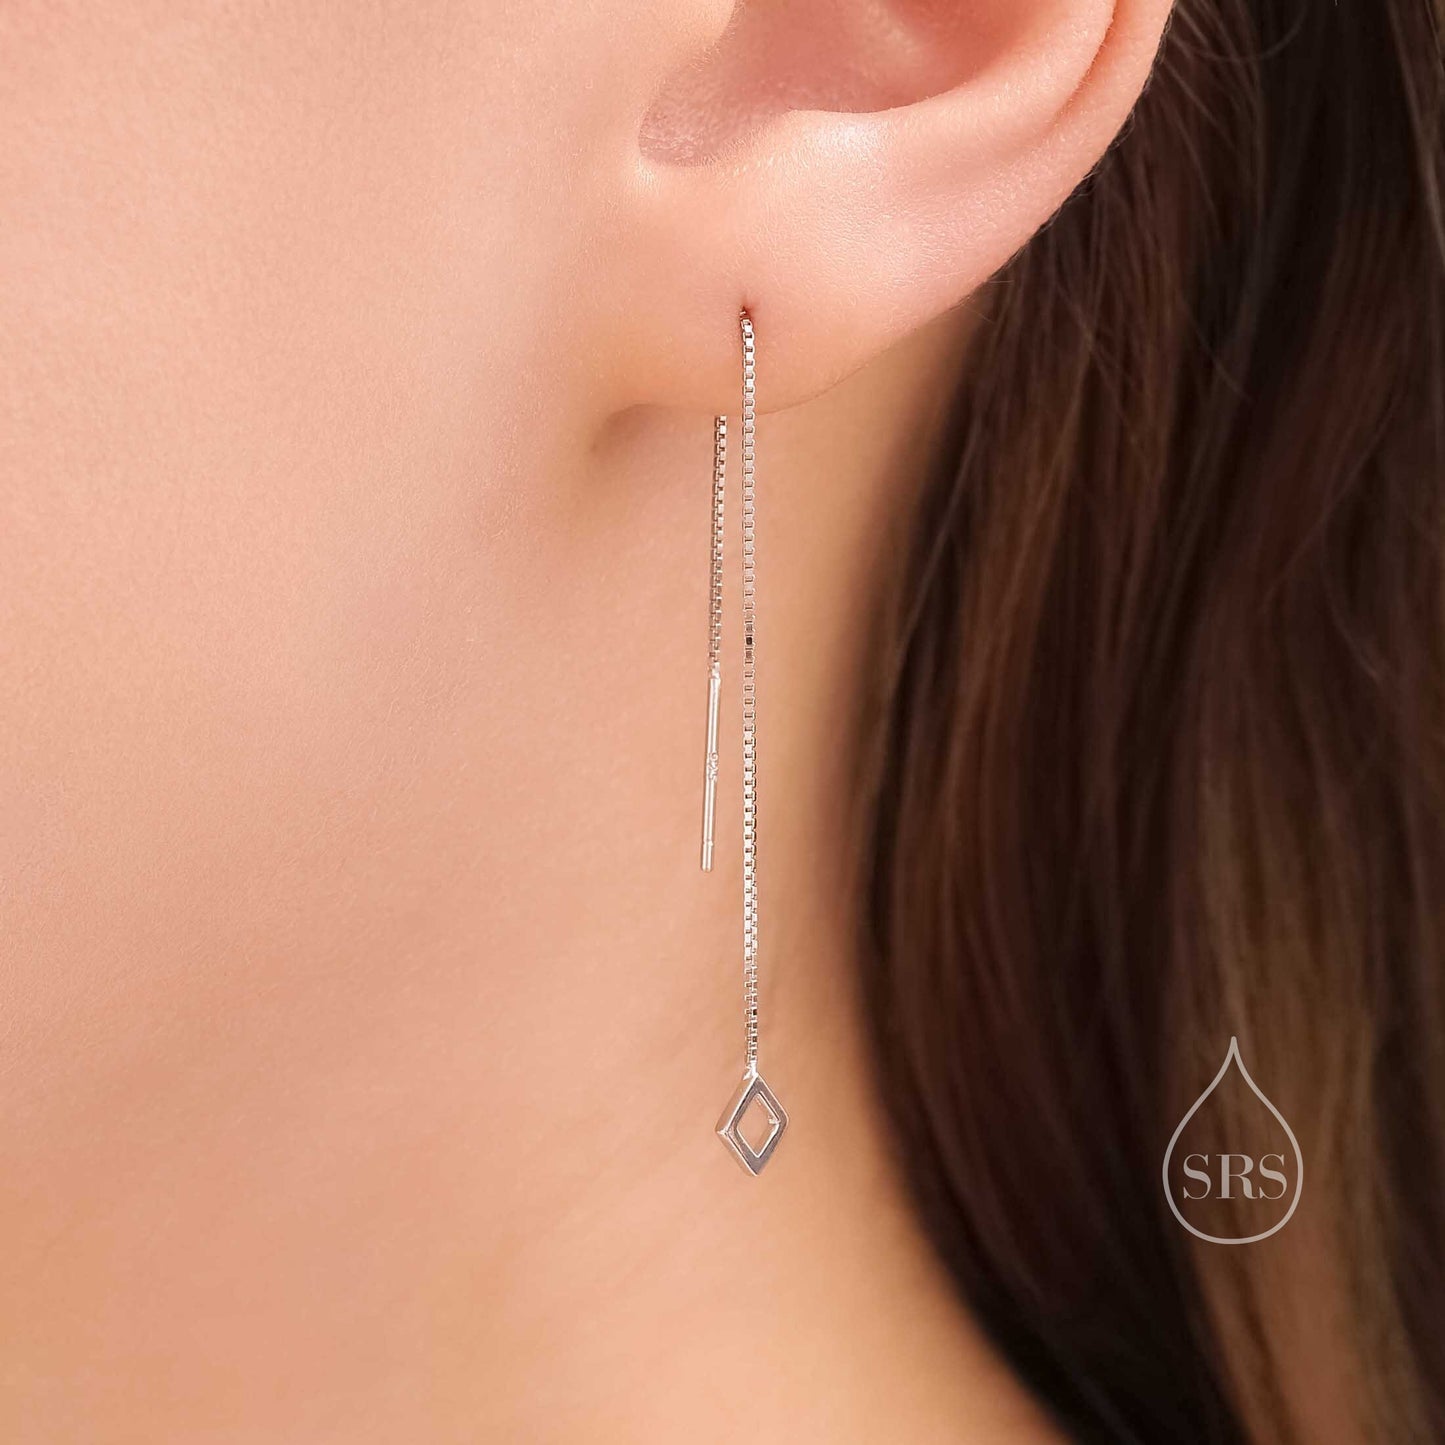 Extra Tiny Open Square Threader Earrings in Sterling Silver, Silver or Gold, Cut-out Square Ear Threaders